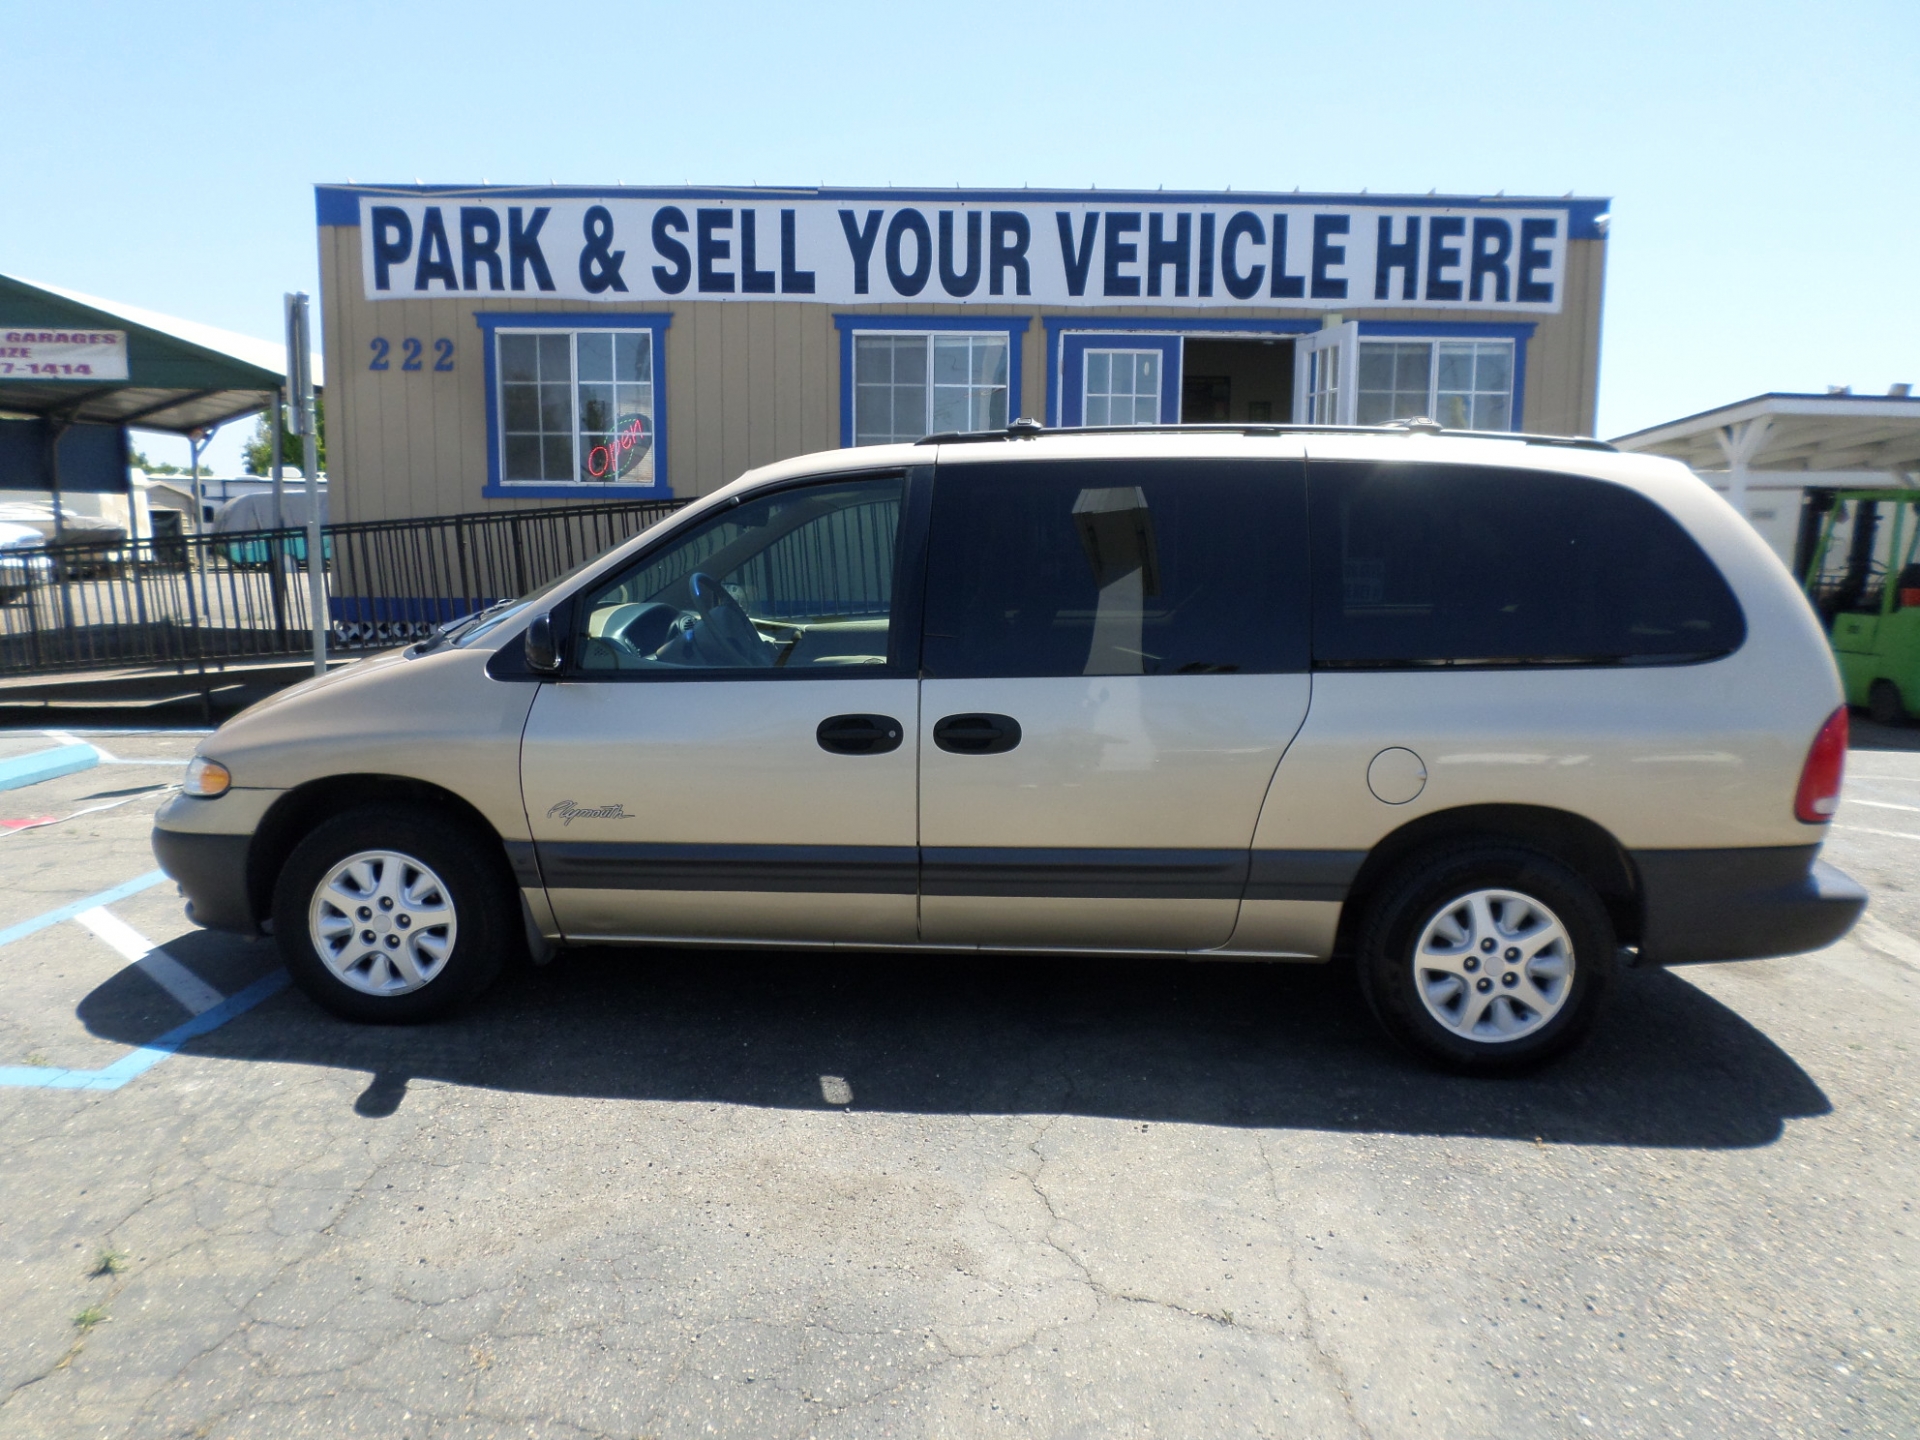 Van for sale: 1998 Plymouth Grand Voyager in Lodi Stockton CA - Lodi Park  and Sell